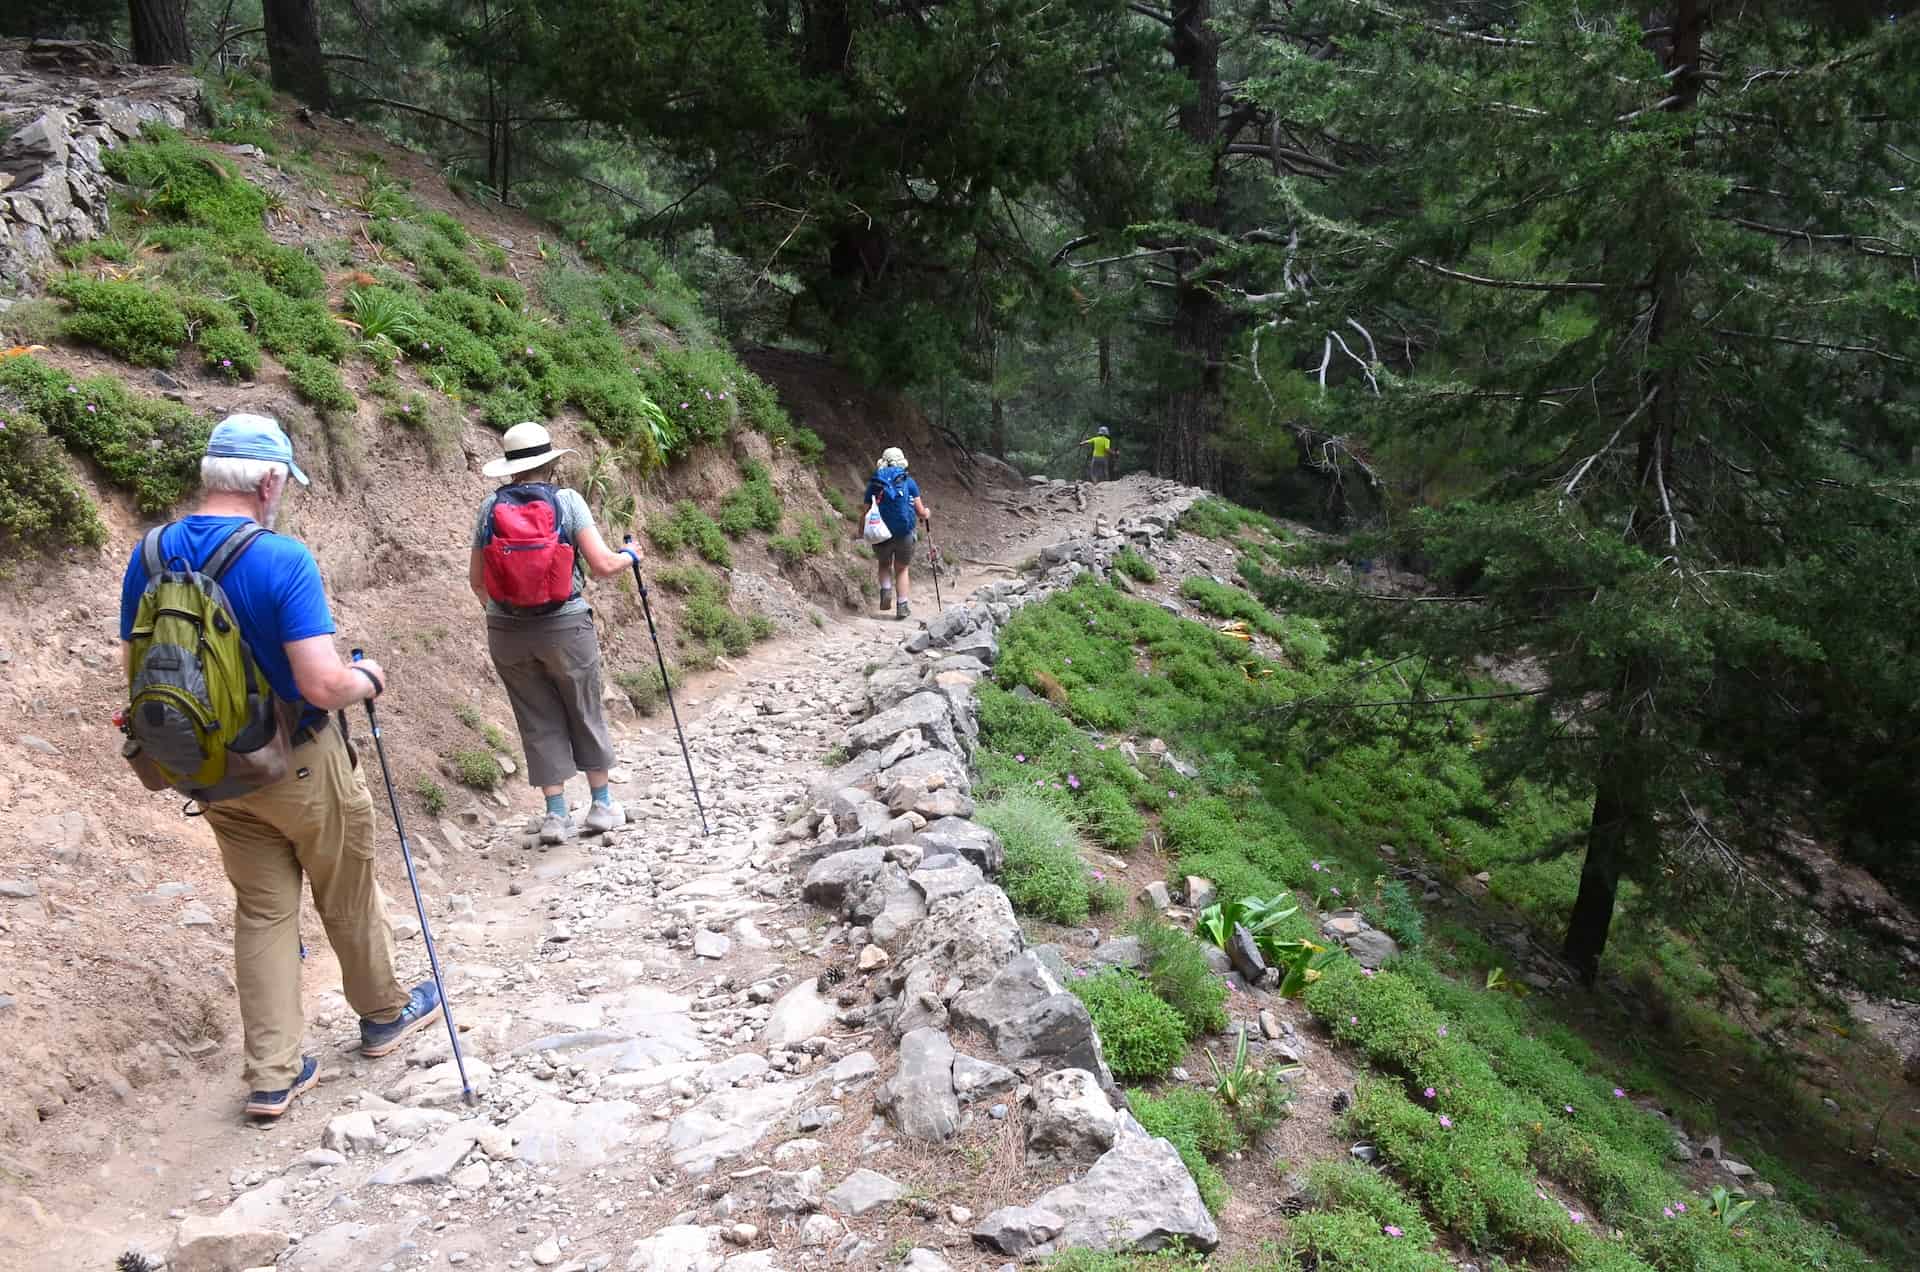 The trail from Neroutsiko to Riza Sykias at the Samaria Gorge in Crete, Greece